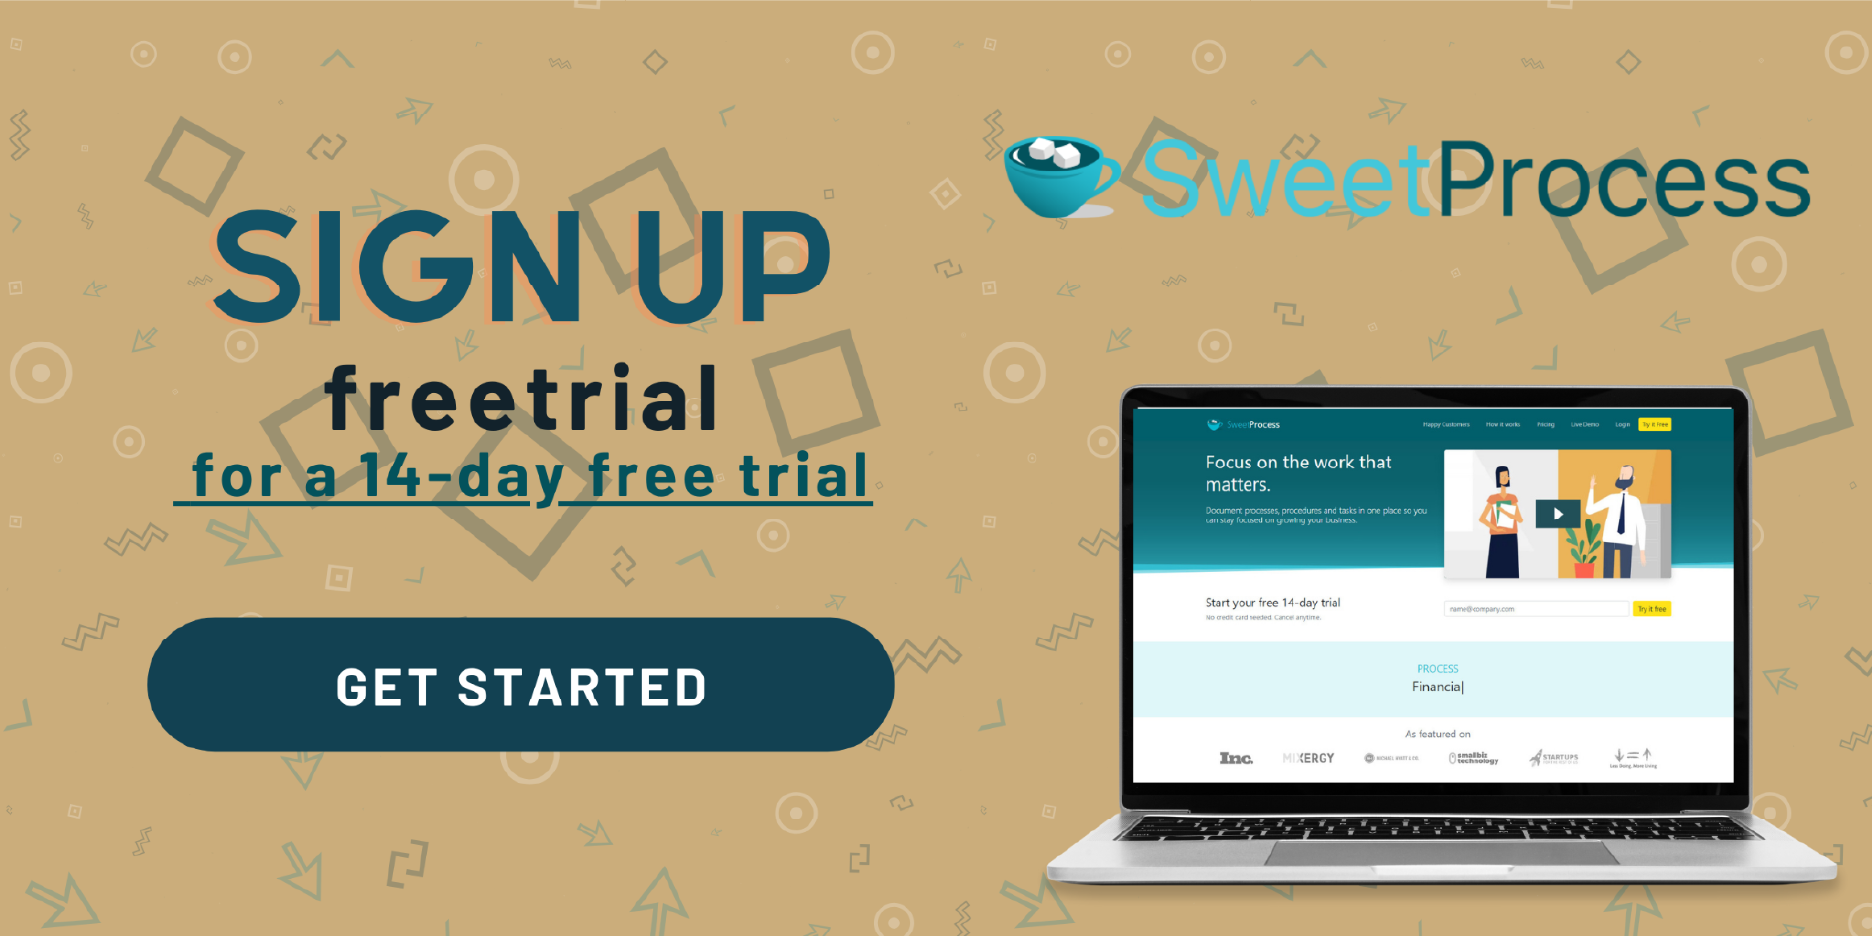 Sign up for a 14 day free trial